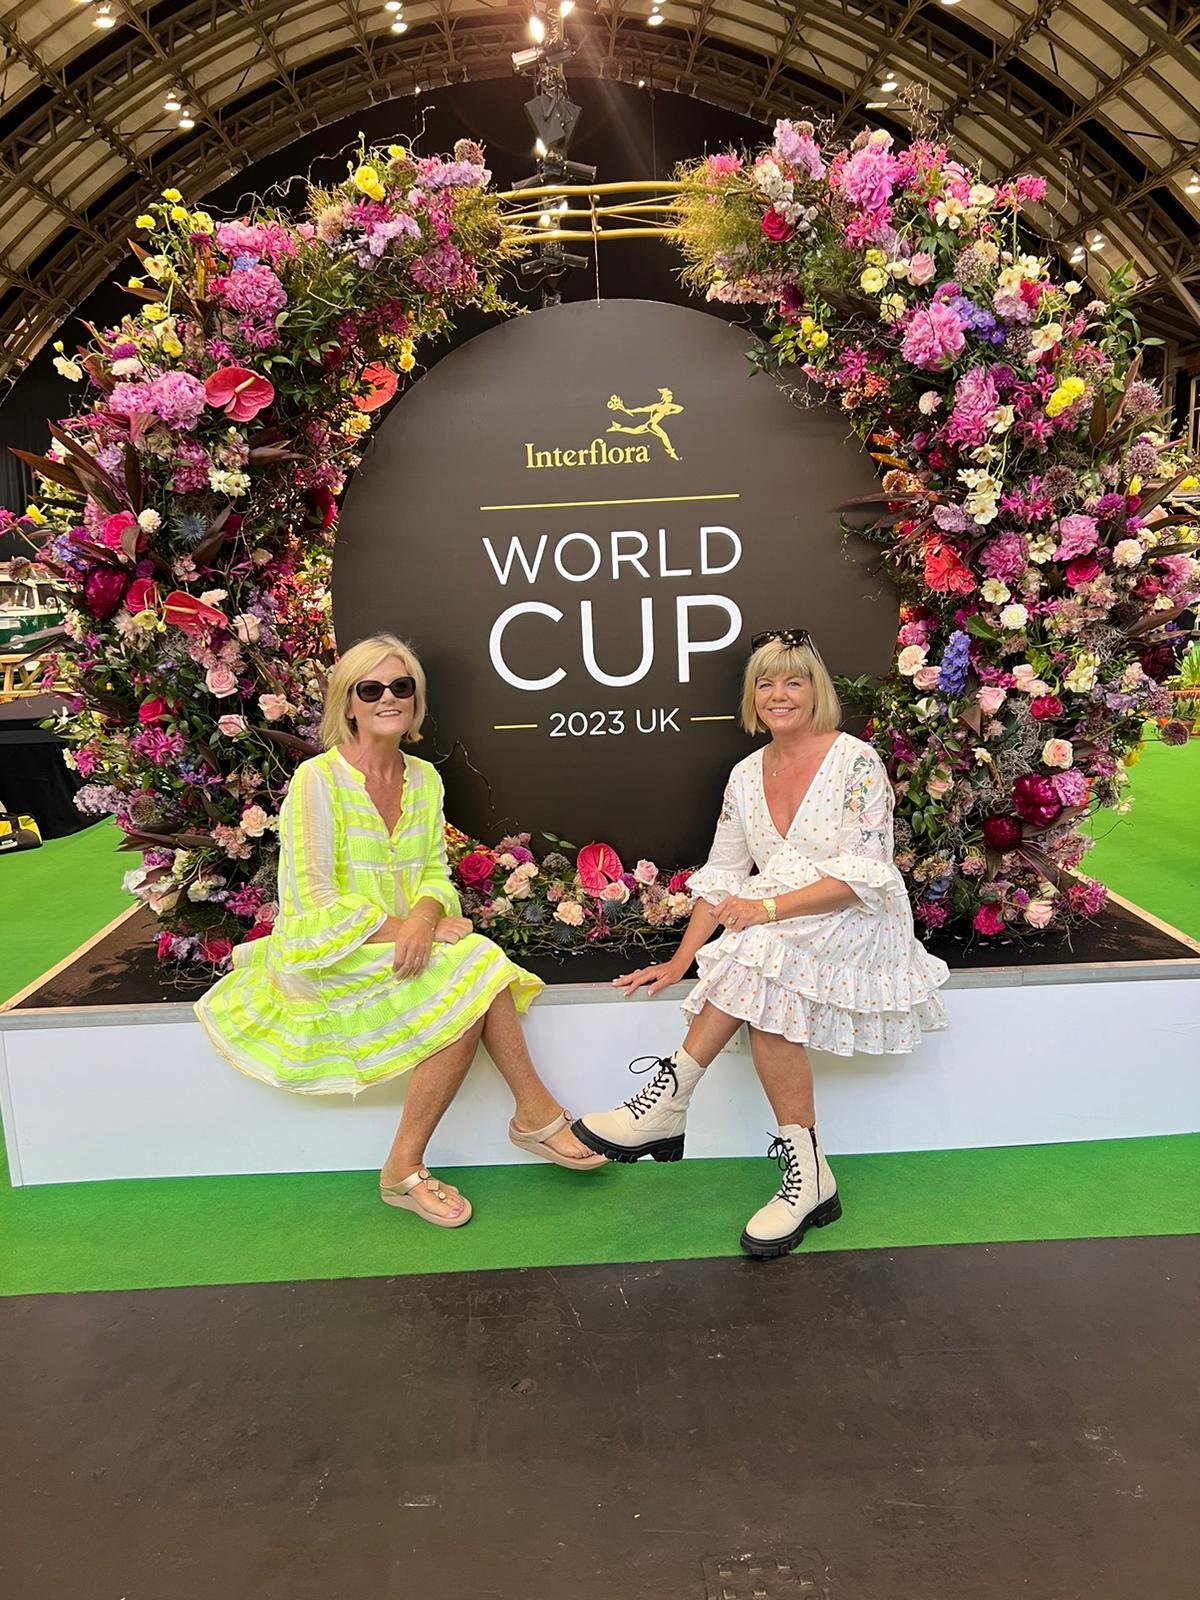 Janette & Deirdre from Kays Flower School visit the Interflora World Cup 2023 in Manchester.jpeg